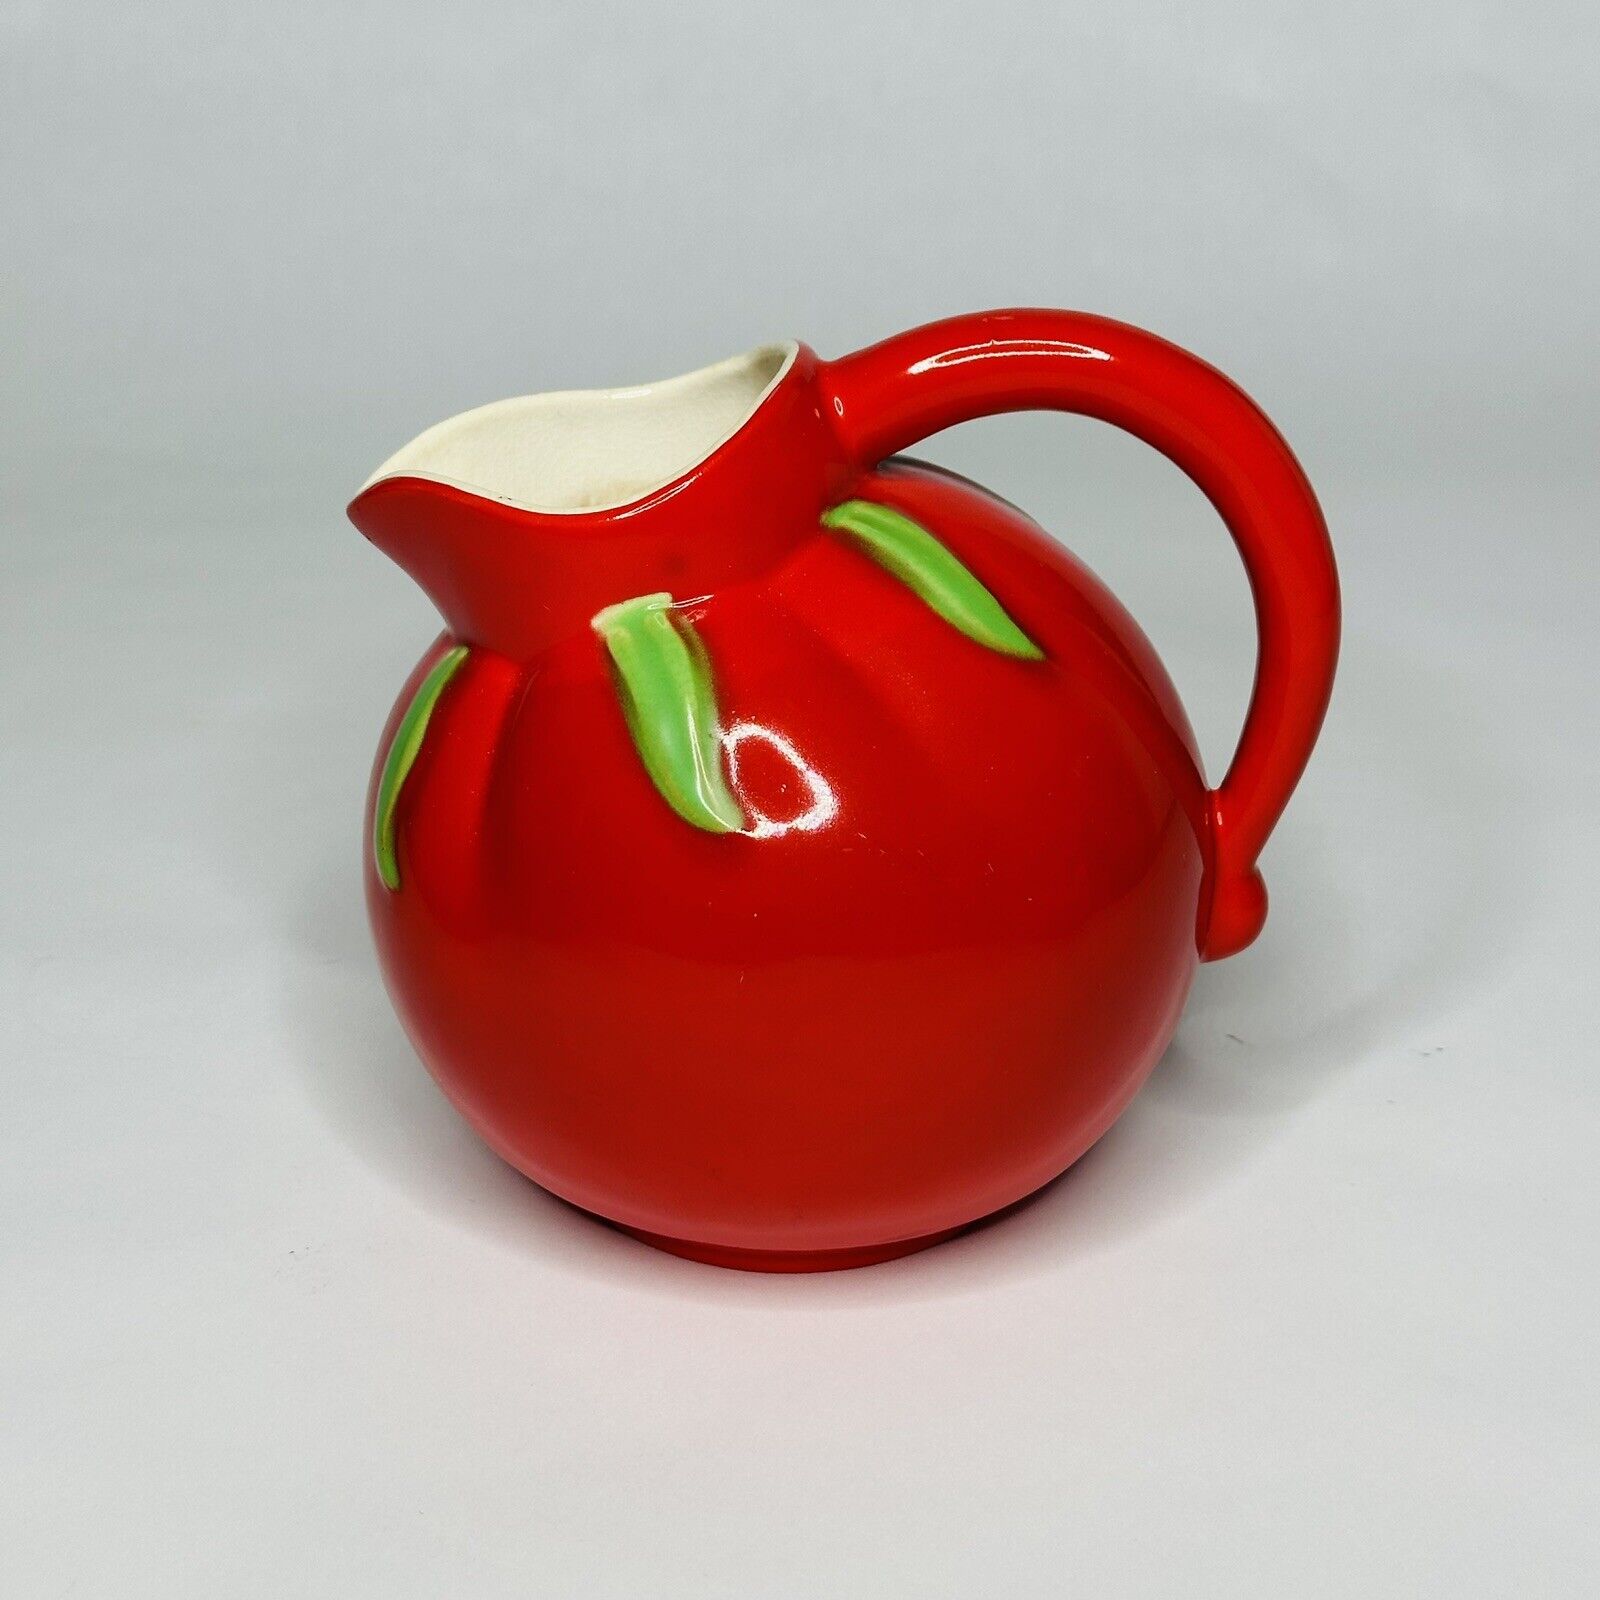 1940s VINTAGE THE PANTRY PARADE® RED TOMATO PITCHER MADE in USA